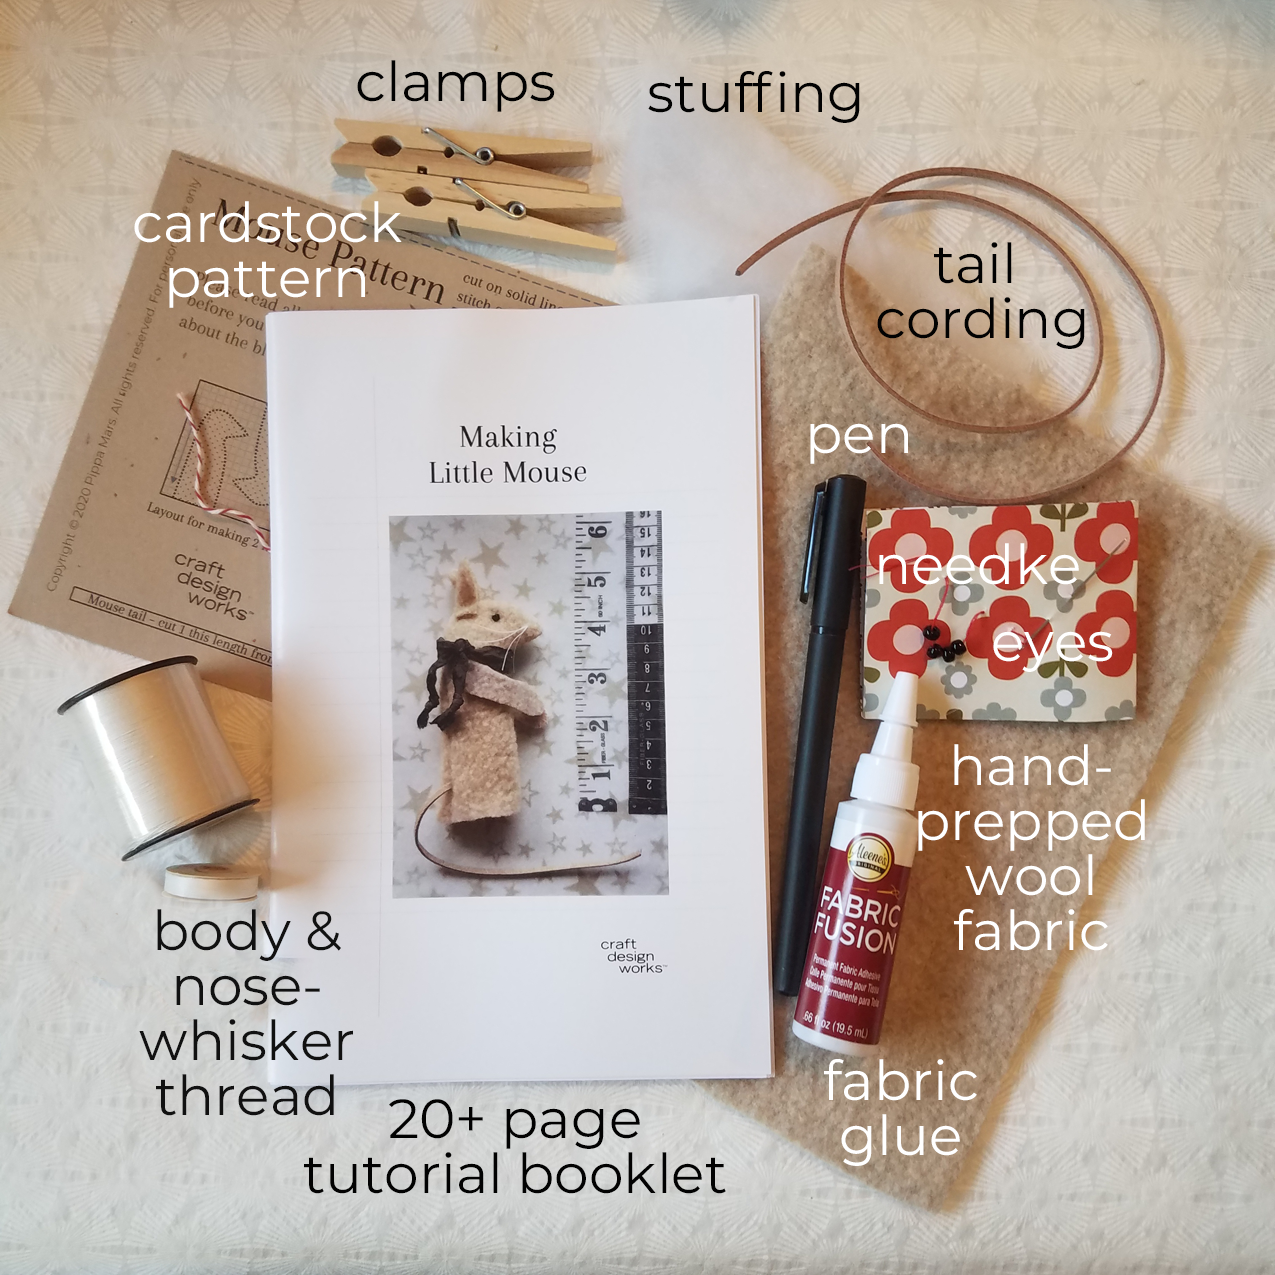 flatlay of crafts kit contents for making finger puppet mice, pattern and all supplies needed to complete 2 finger puppets